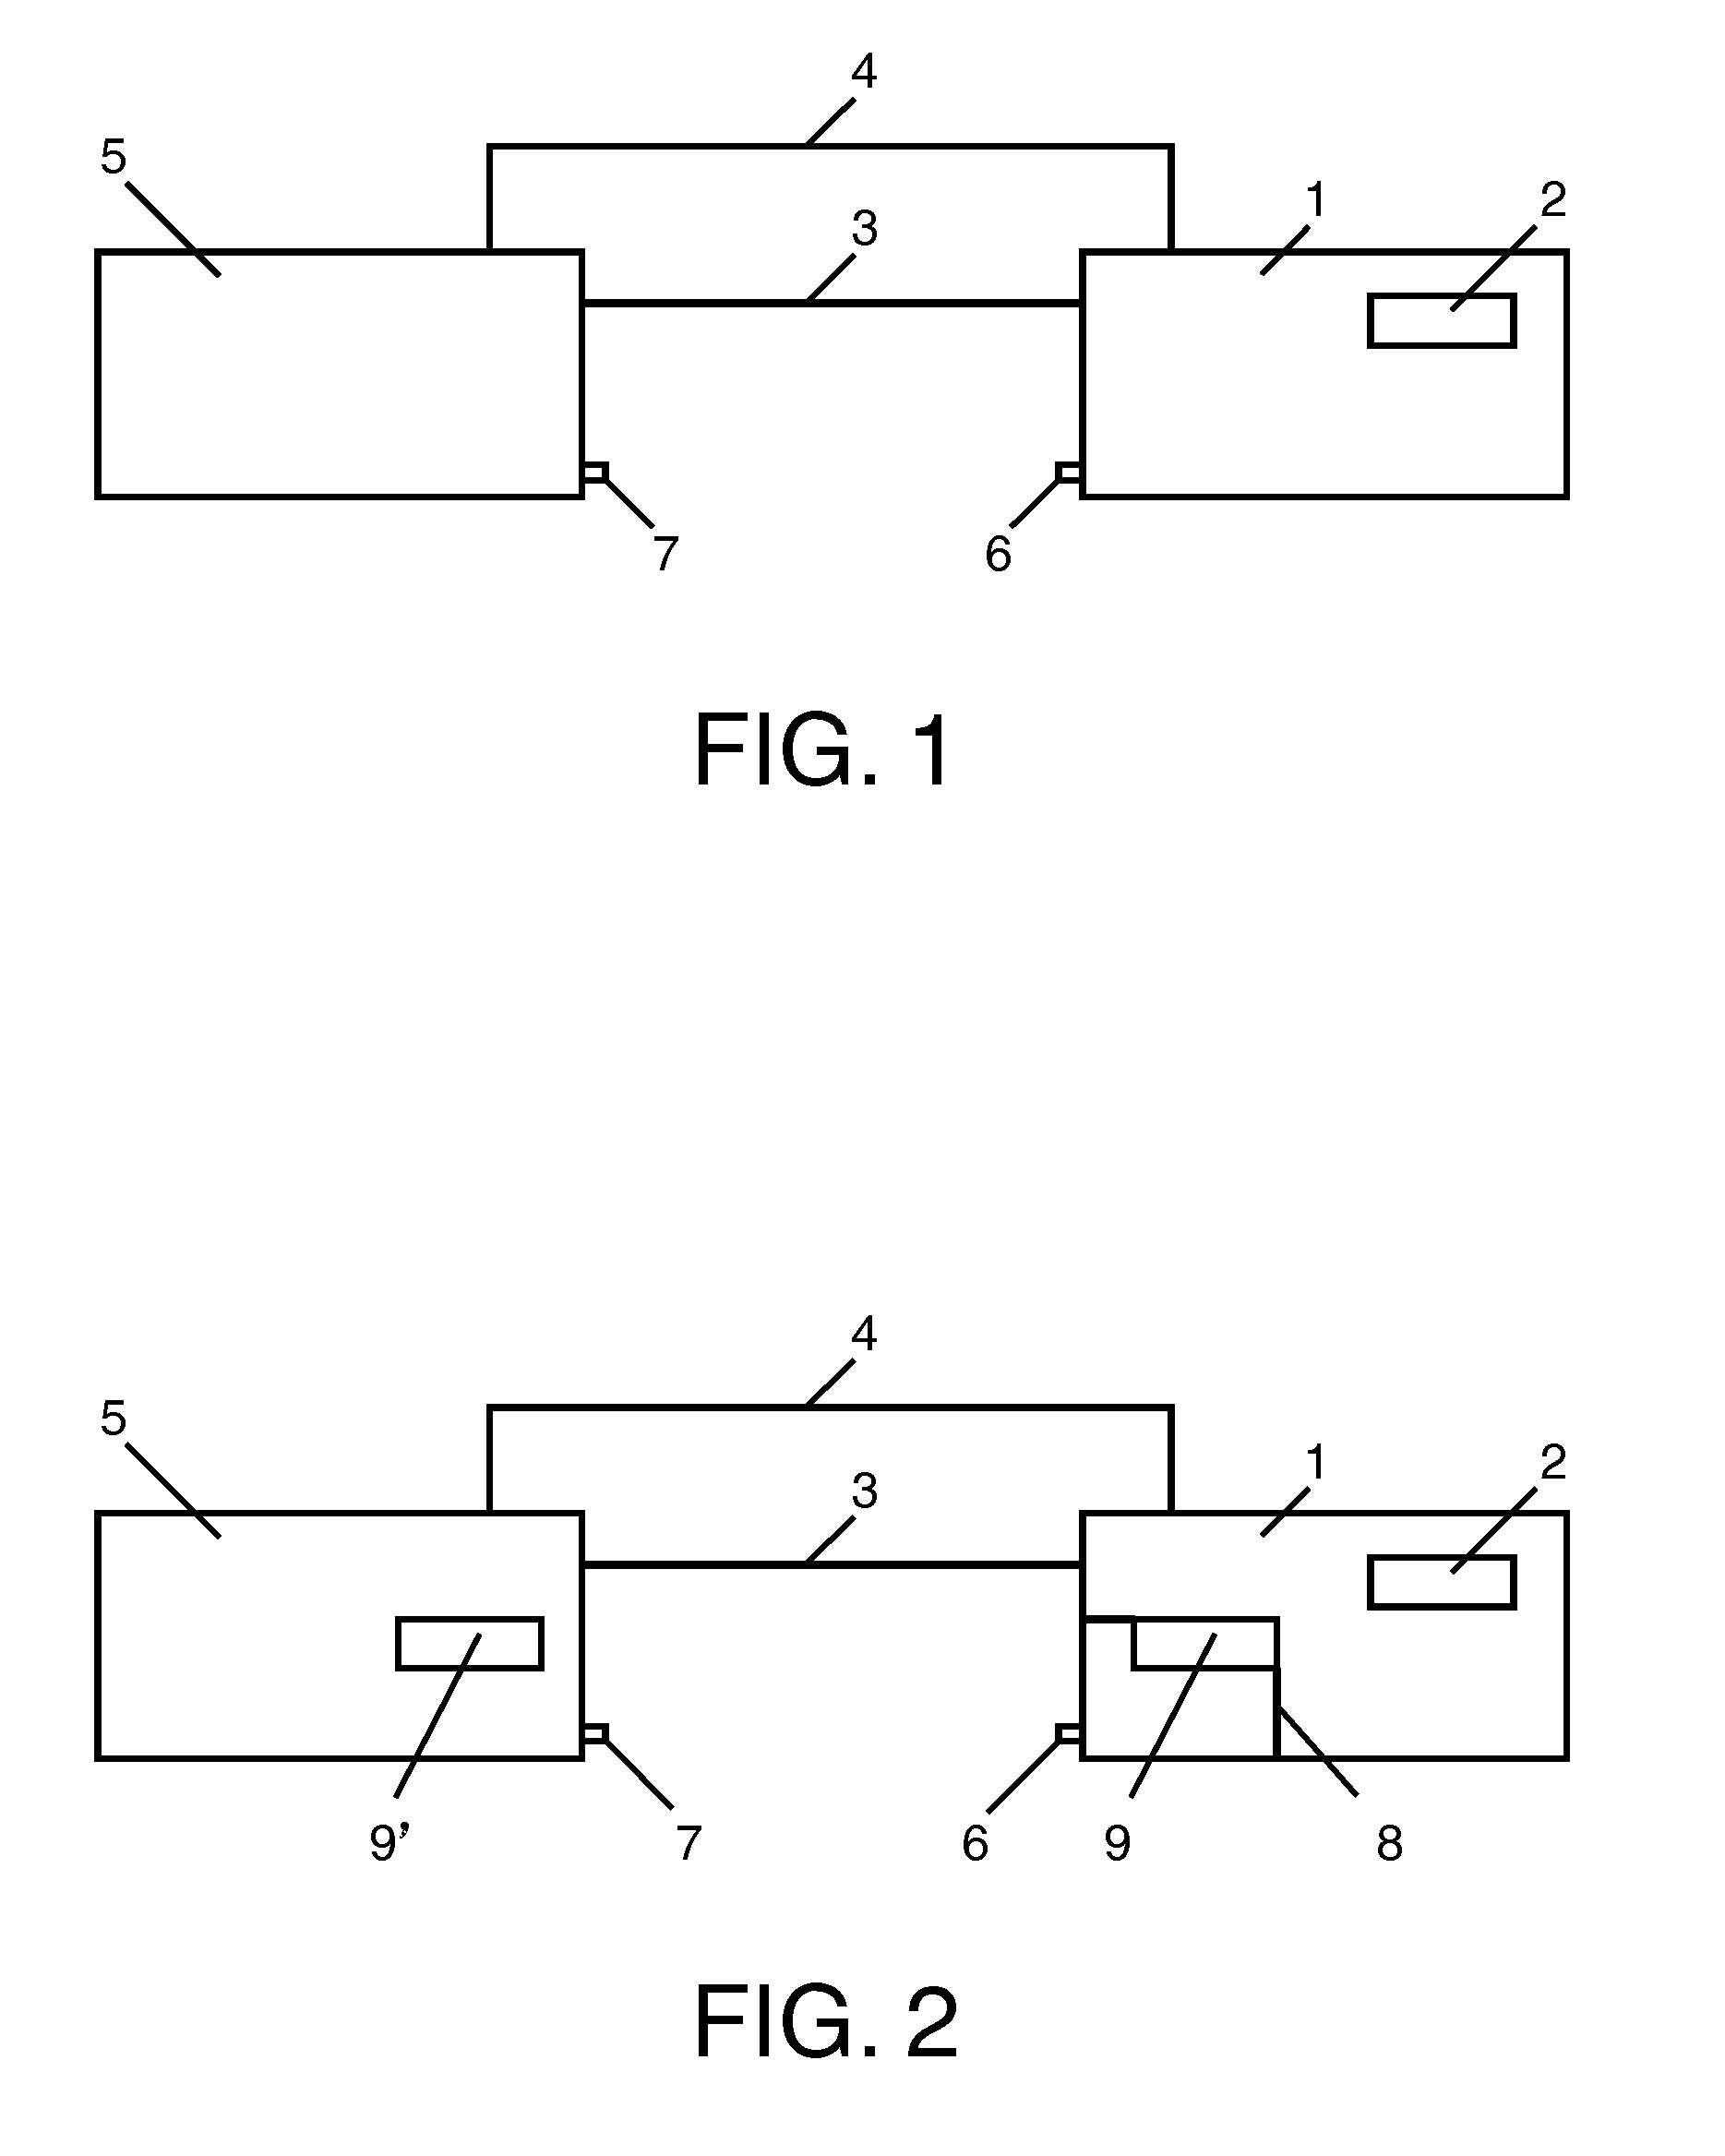 Electrical circuit comprising a dynamic random access memory (DRAM) with concurrent refresh and read or write, and method to perform concurent